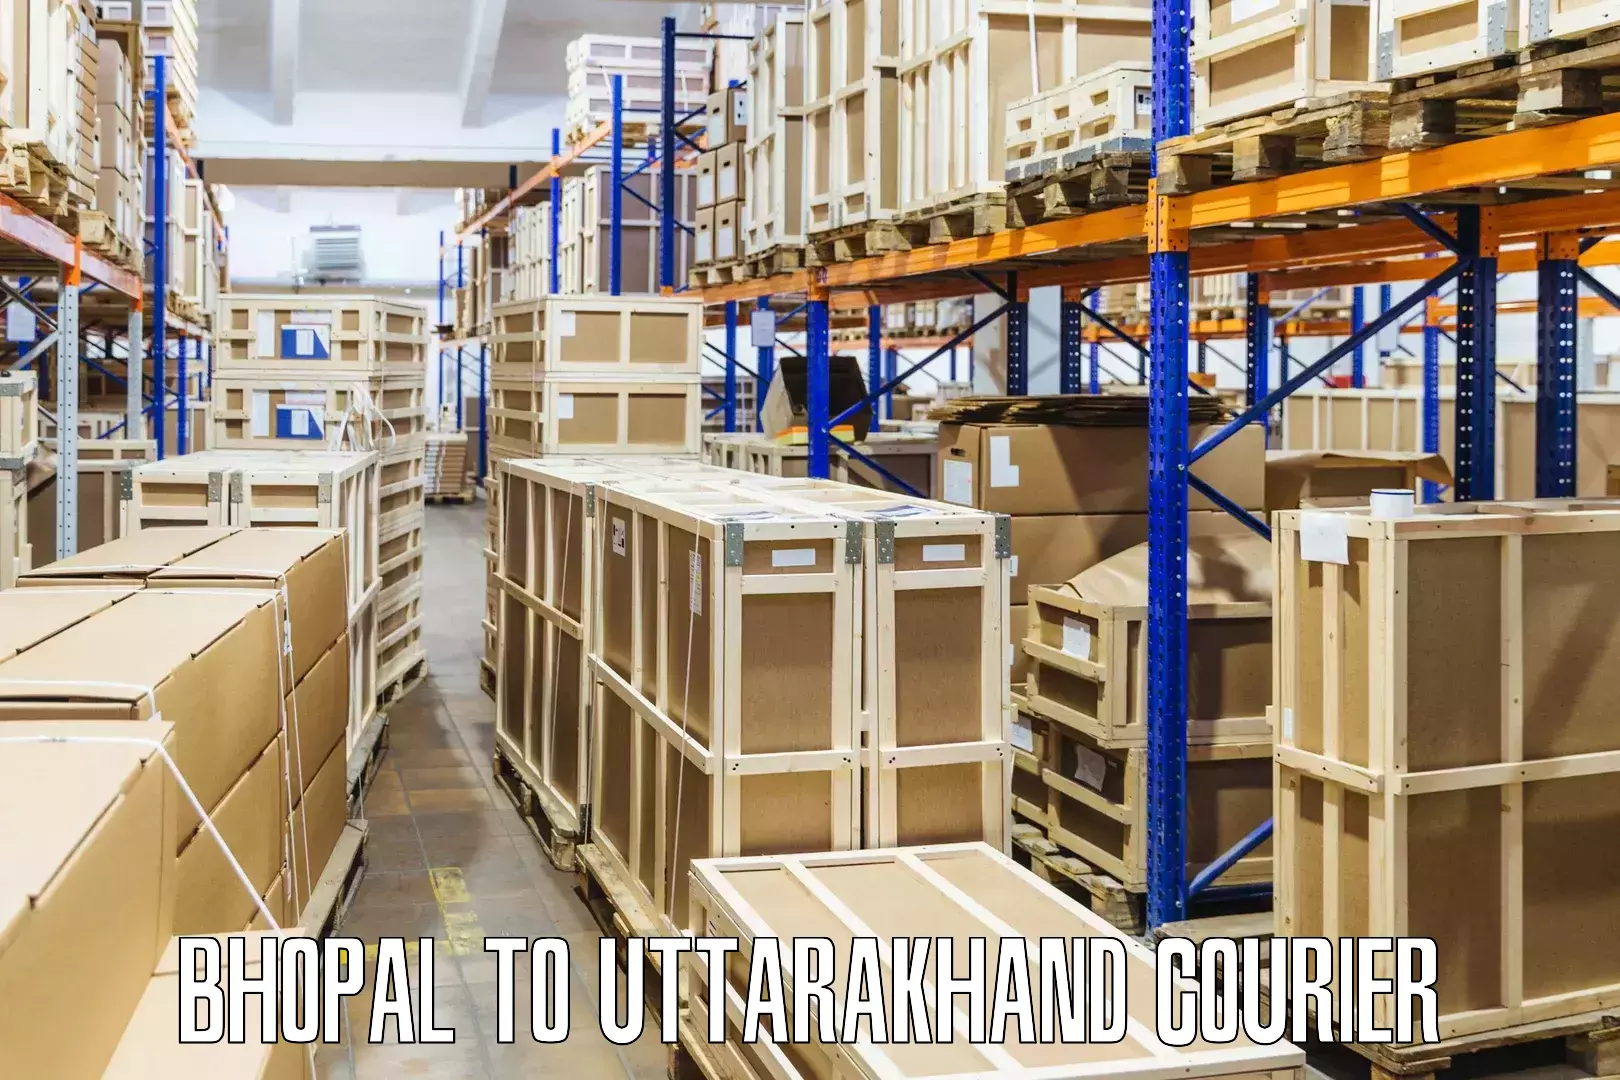 Air courier services Bhopal to Uttarakhand